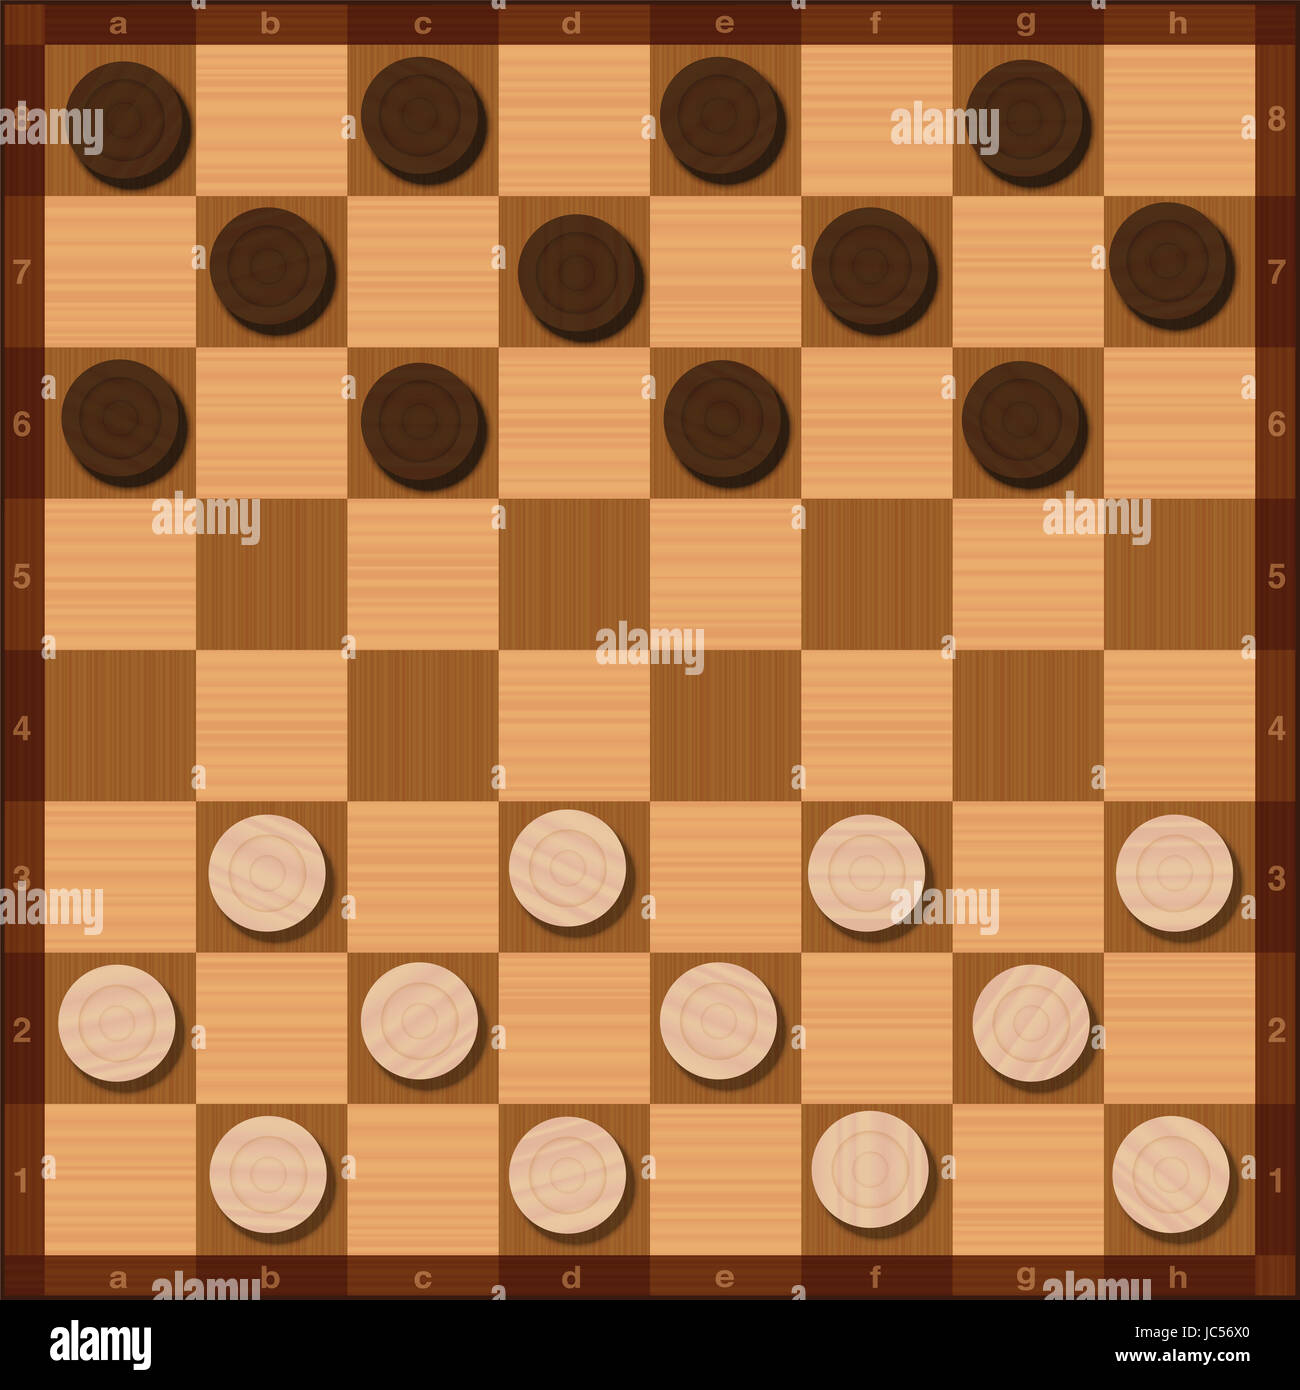 Draughts game, starting position of the twenty-four tokens, top view, wood grain style. Stock Photo